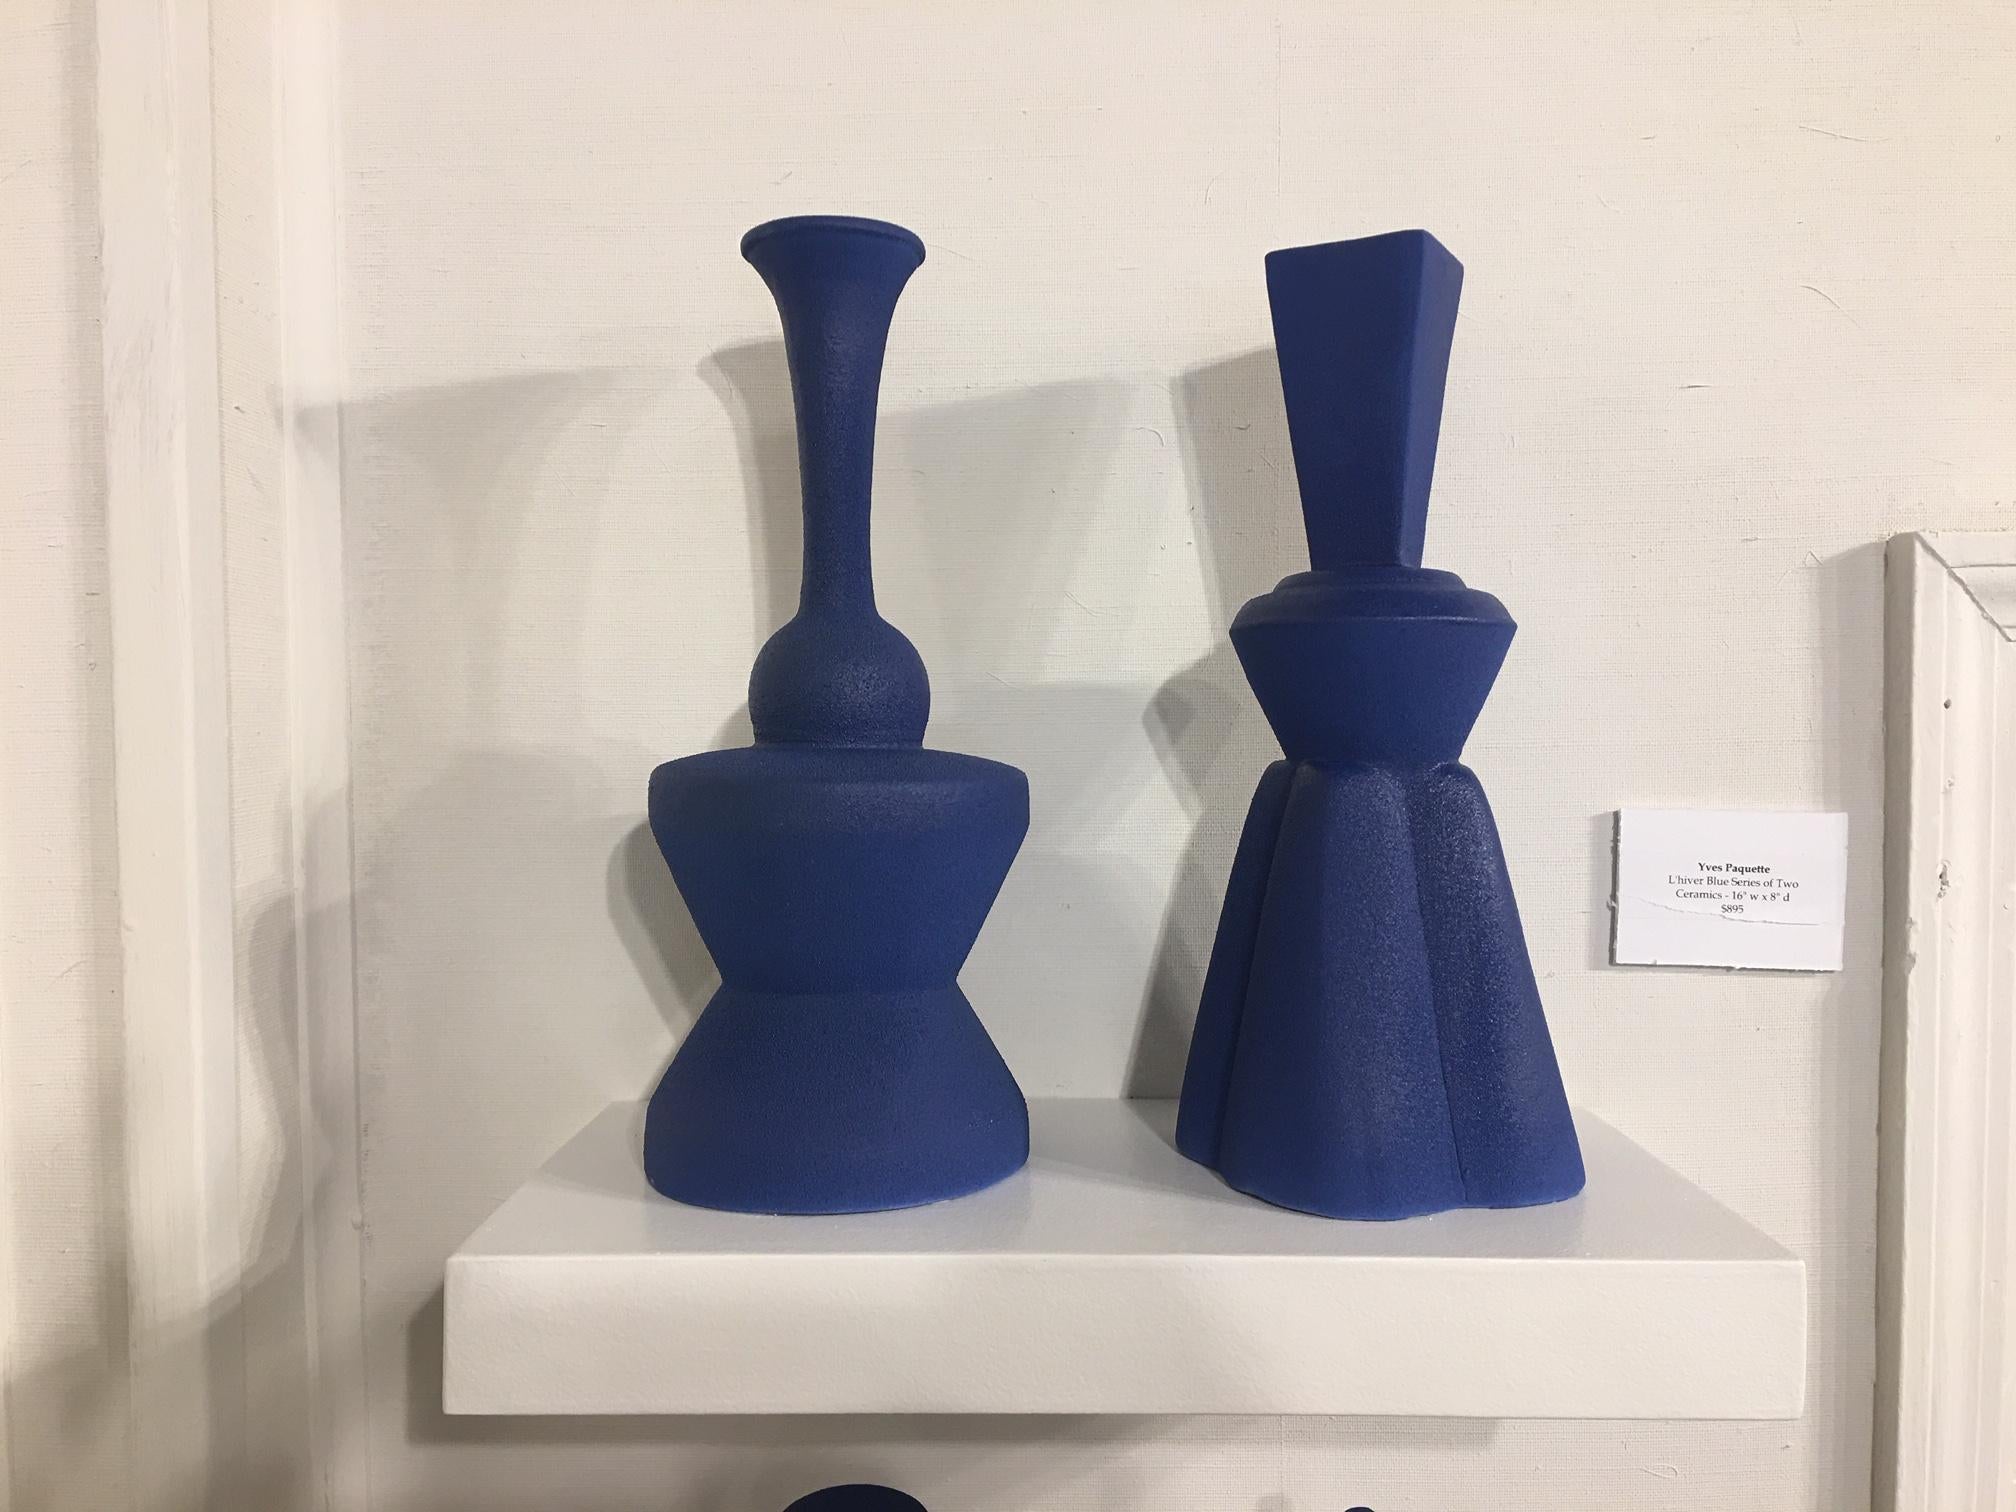 Pair of modern Pantone color fine ceramic objects of art by Yves Paquette on a floating shelf. L'hiver Blue Series of Two

Yves Paquette - 